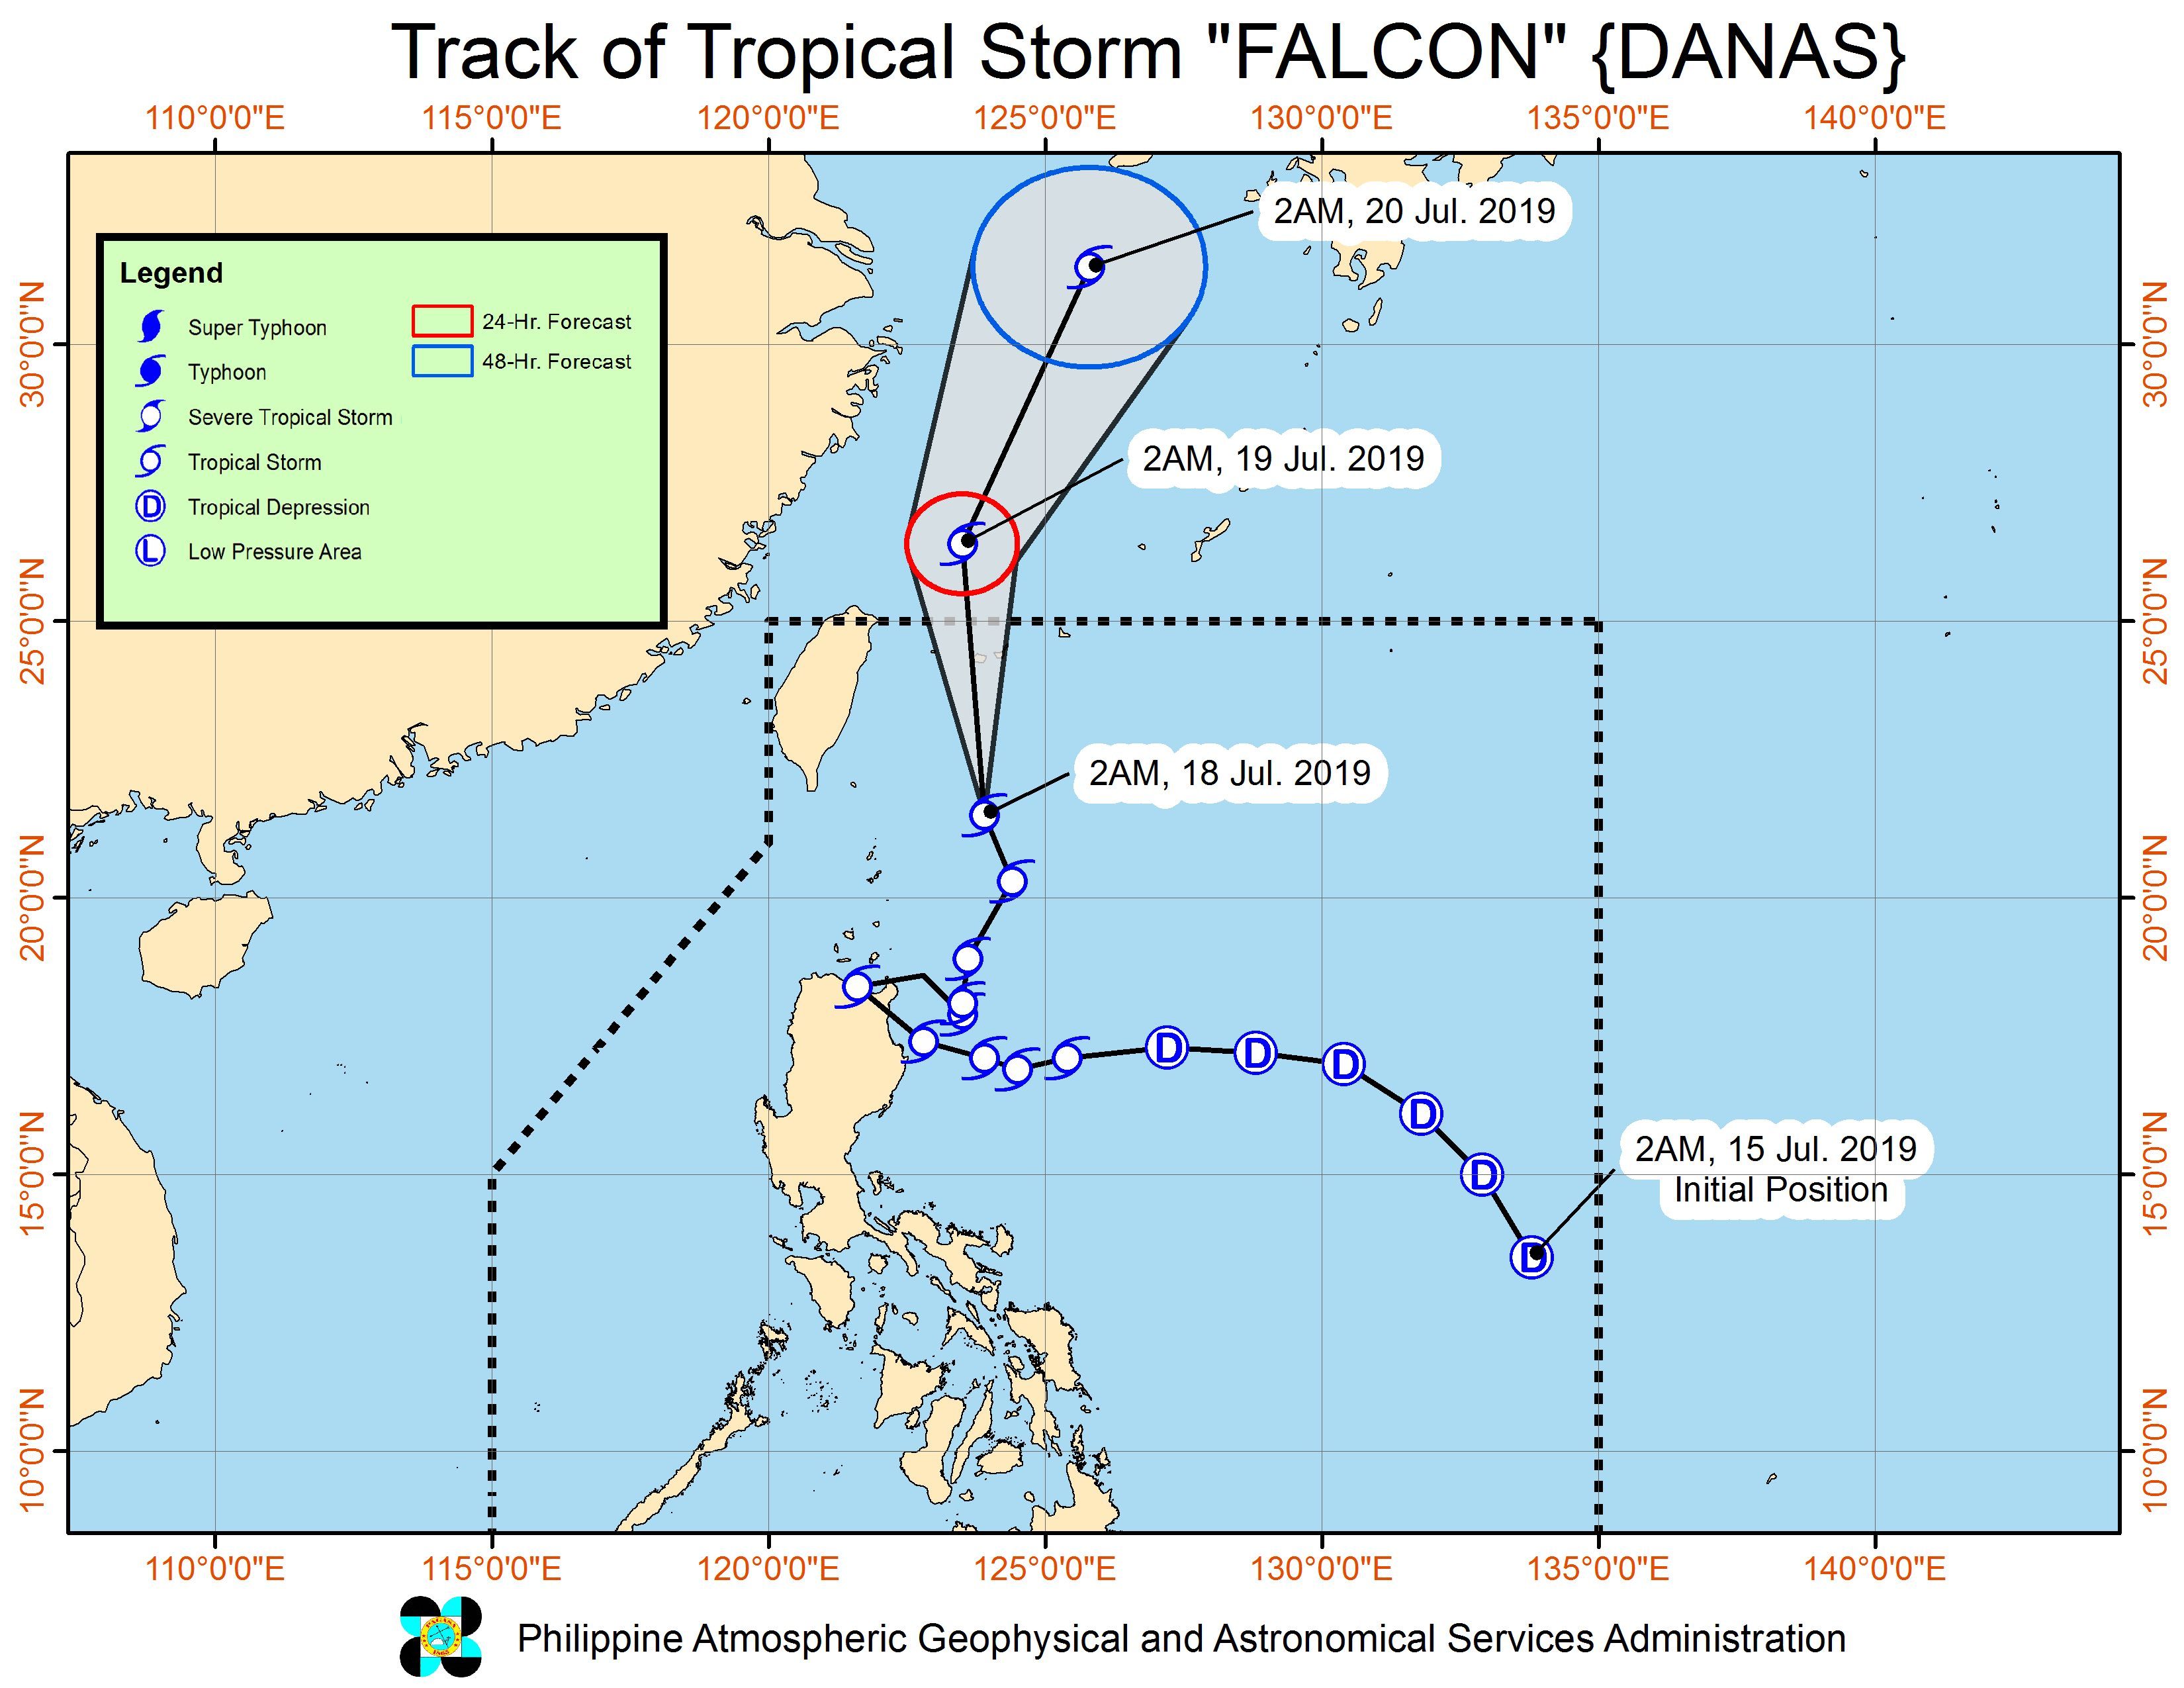 Forecast track of Tropical Storm Falcon (Danas) as of July 18, 2019, 5 am. Image from PAGASA 